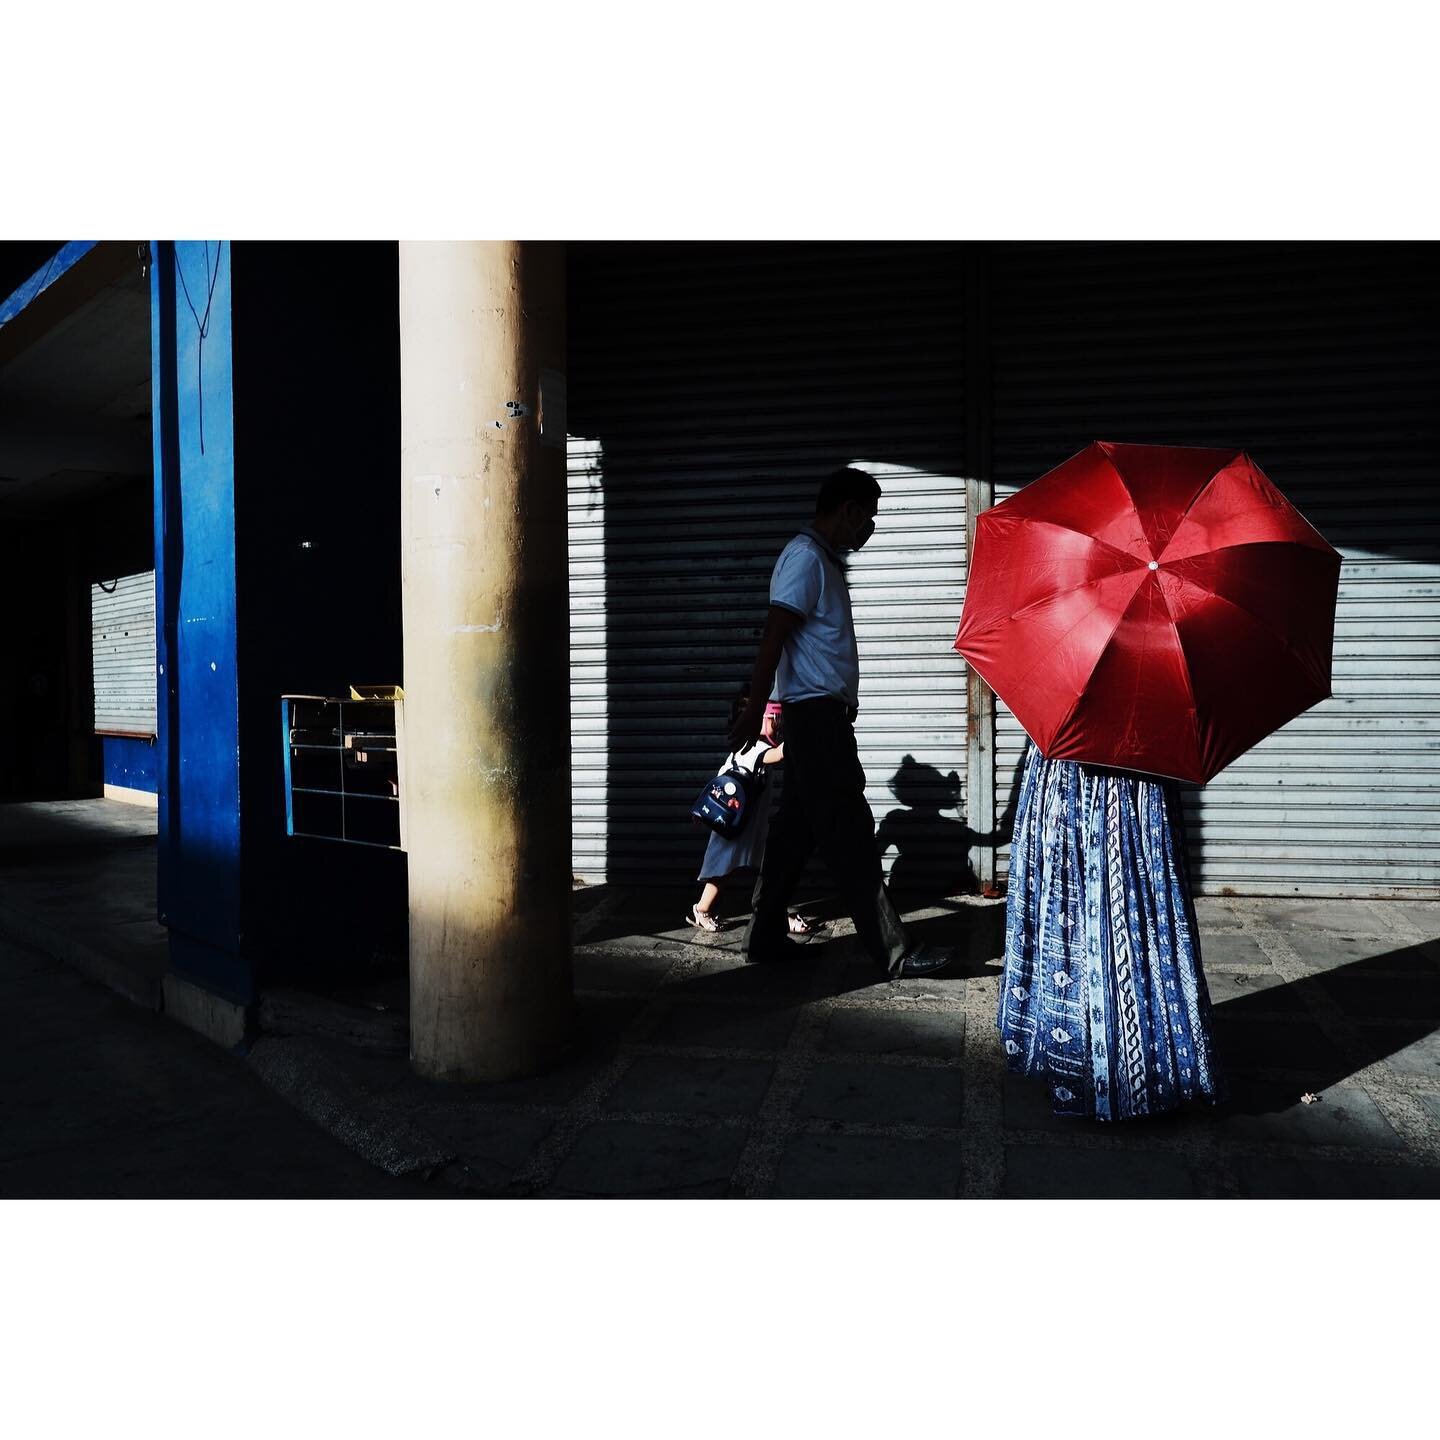 Family with red umbrella
&bull;
Dumaguete, Philippines
2020
&bull;
&bull;
&bull;
CAM 0304
#CatchAMoment #6200street #fujifilm #spicollective #tdmmag #23mmf2wr #thephotosector #littleboxcollective #myspc #street_avengers #thepictoriallist #streetmomen